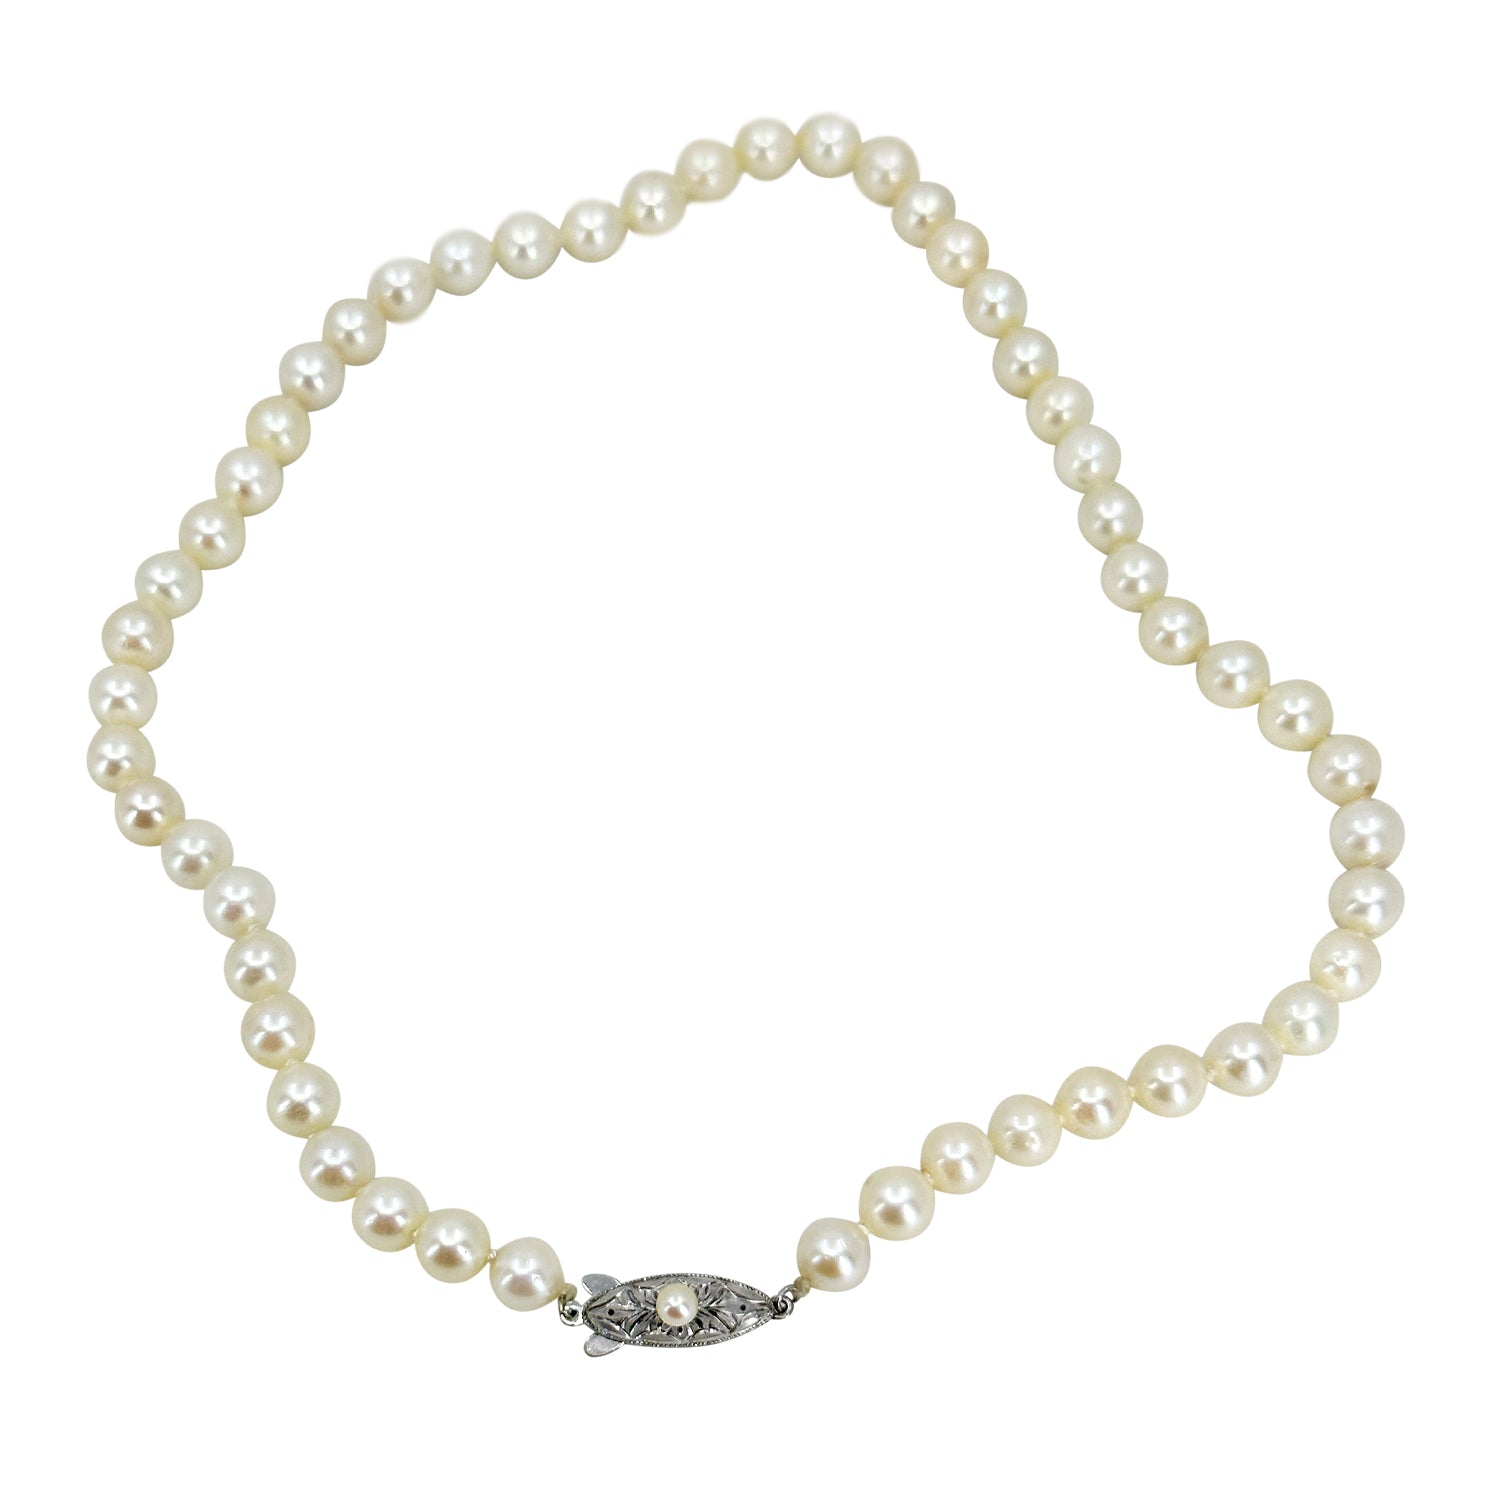 Quality Engraved Japanese Cultured Saltwater Akoya Pearl Choker Necklace- Sterling Silver 15.25 Inch